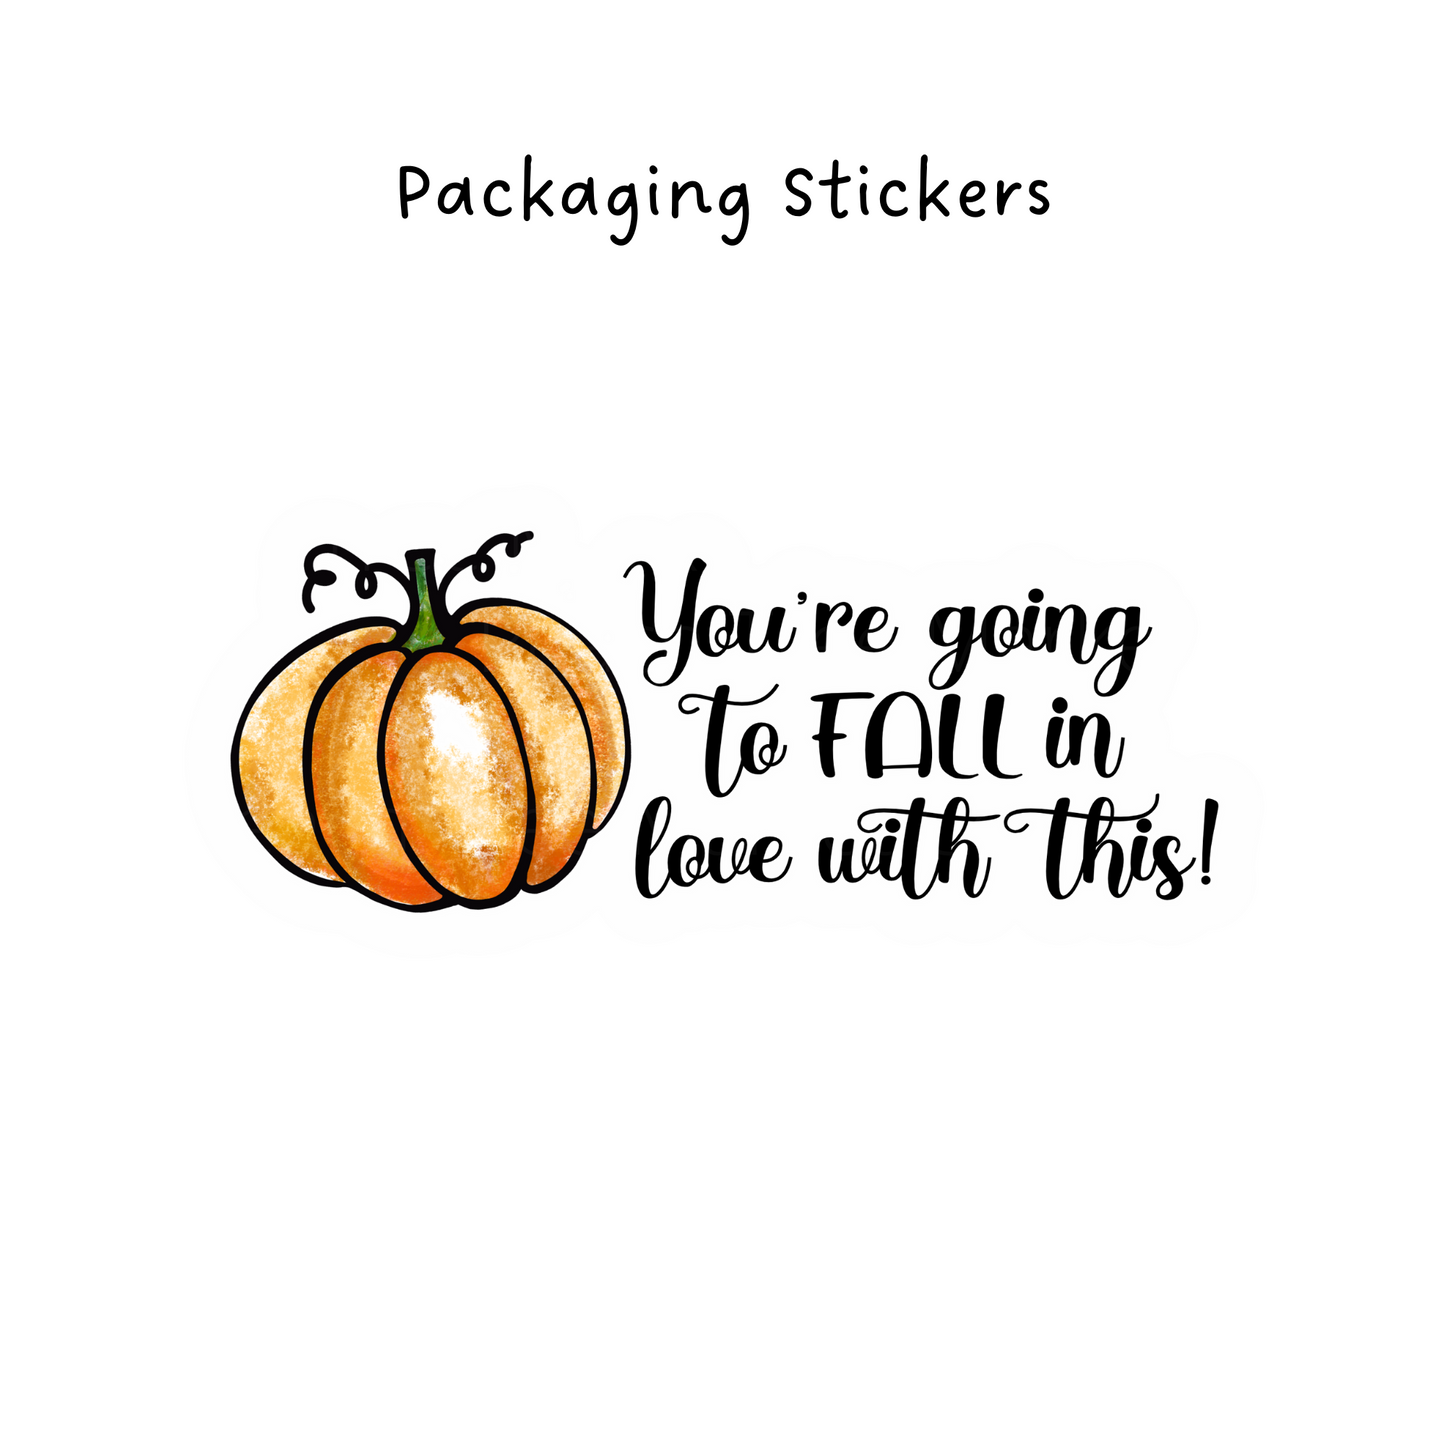 Your Going To Fall Love in This  Packaging Sticker